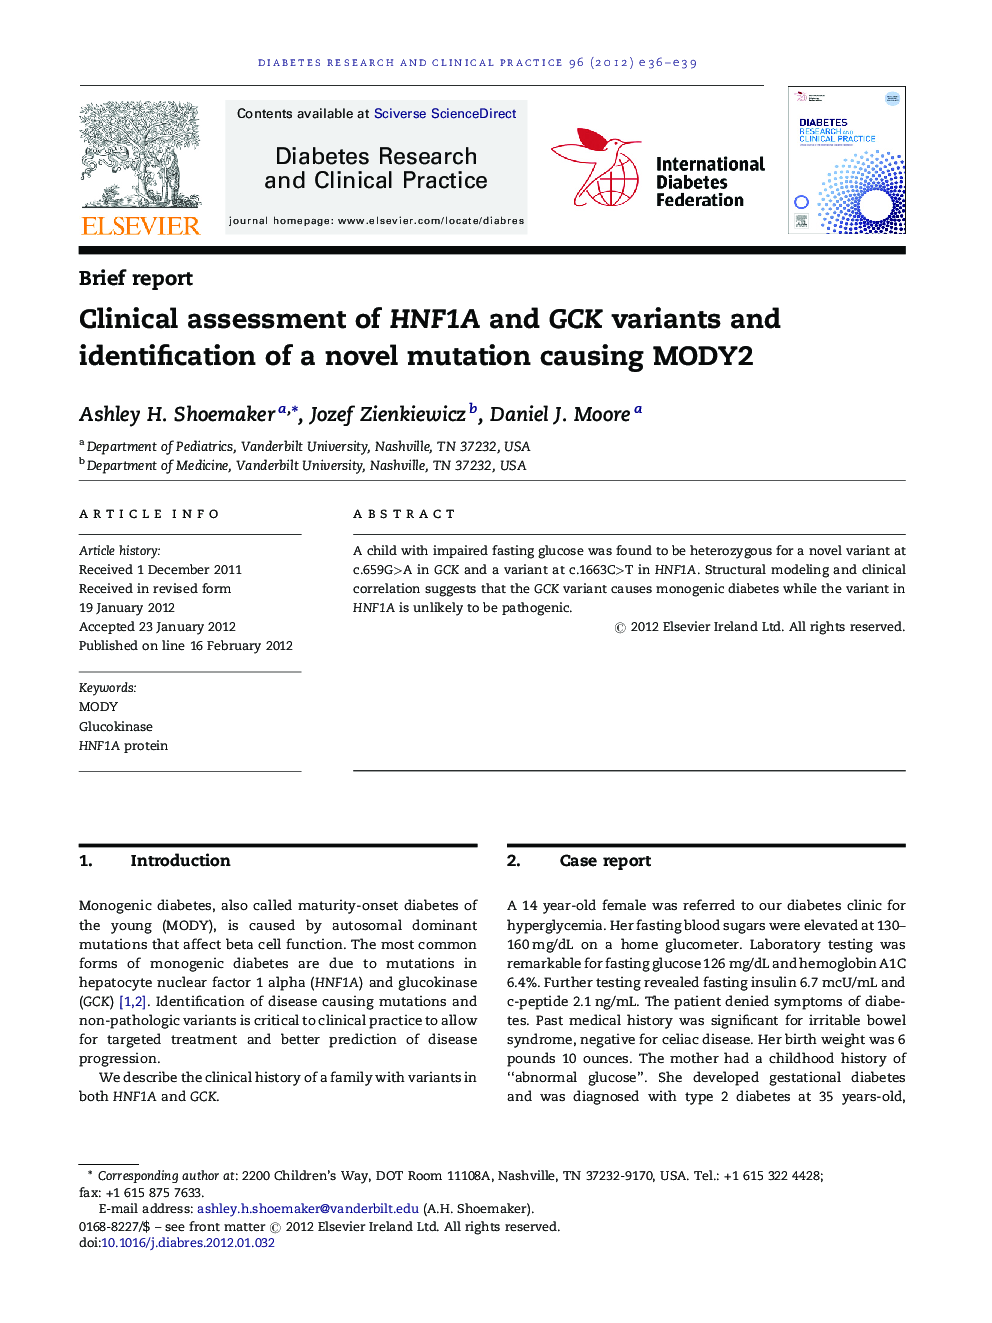 Clinical assessment of HNF1A and GCK variants and identification of a novel mutation causing MODY2